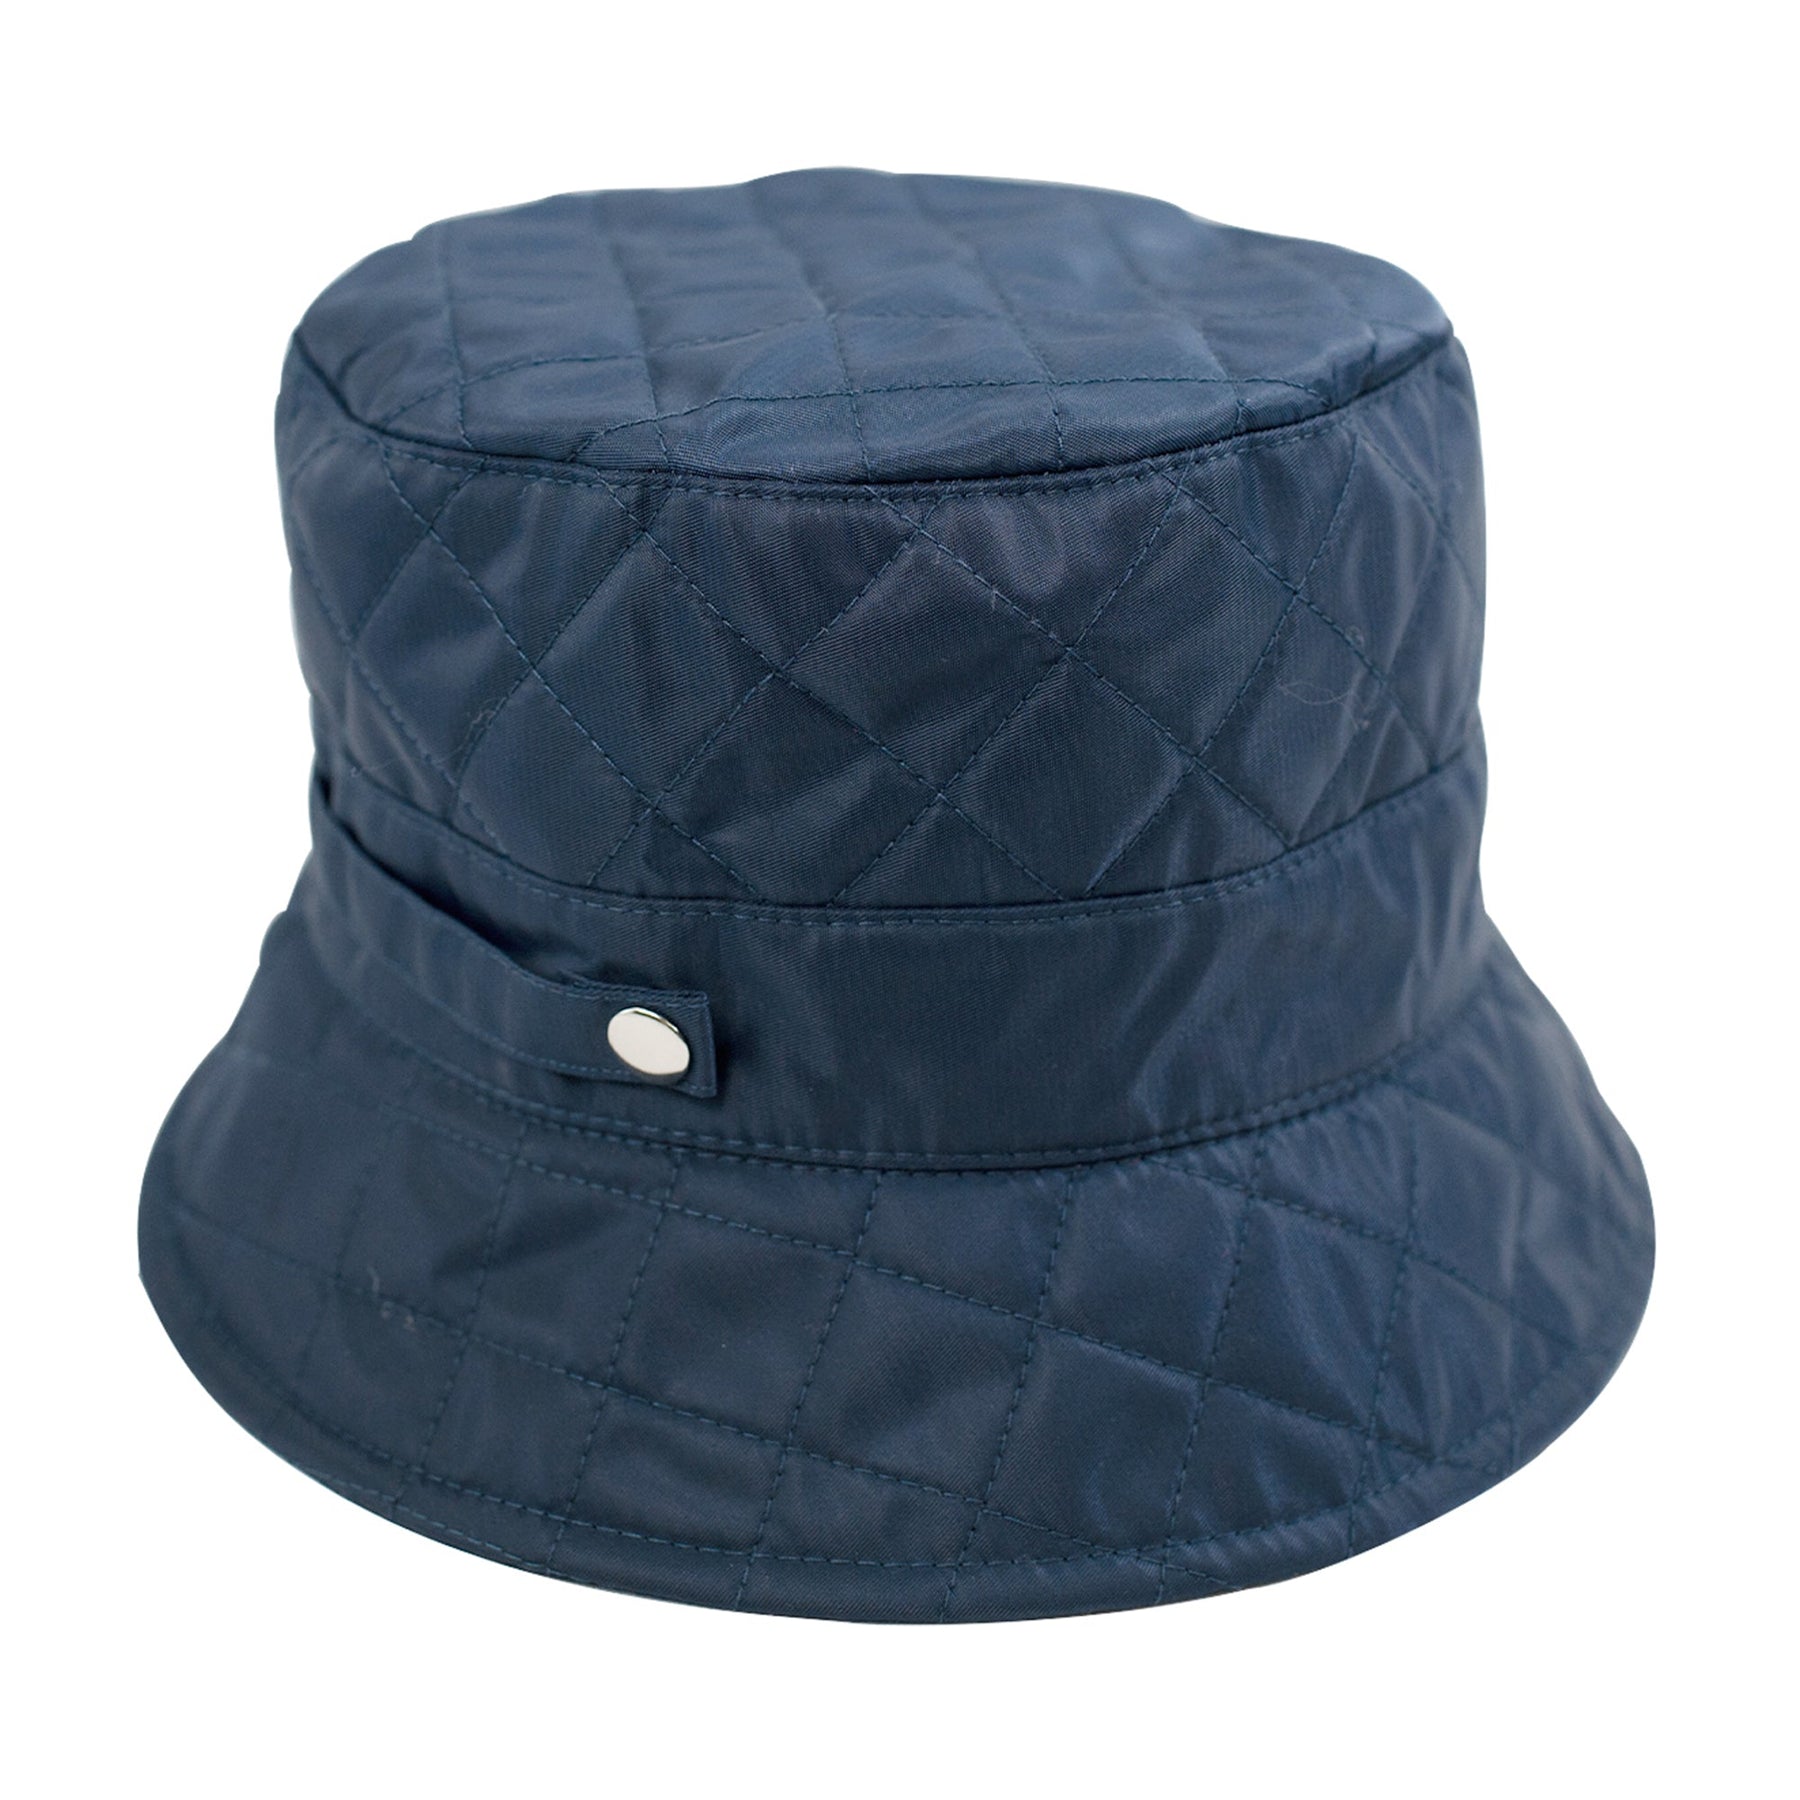 San Diego Hat Company Women's Quilted Rain Hat SDH3402, Blue